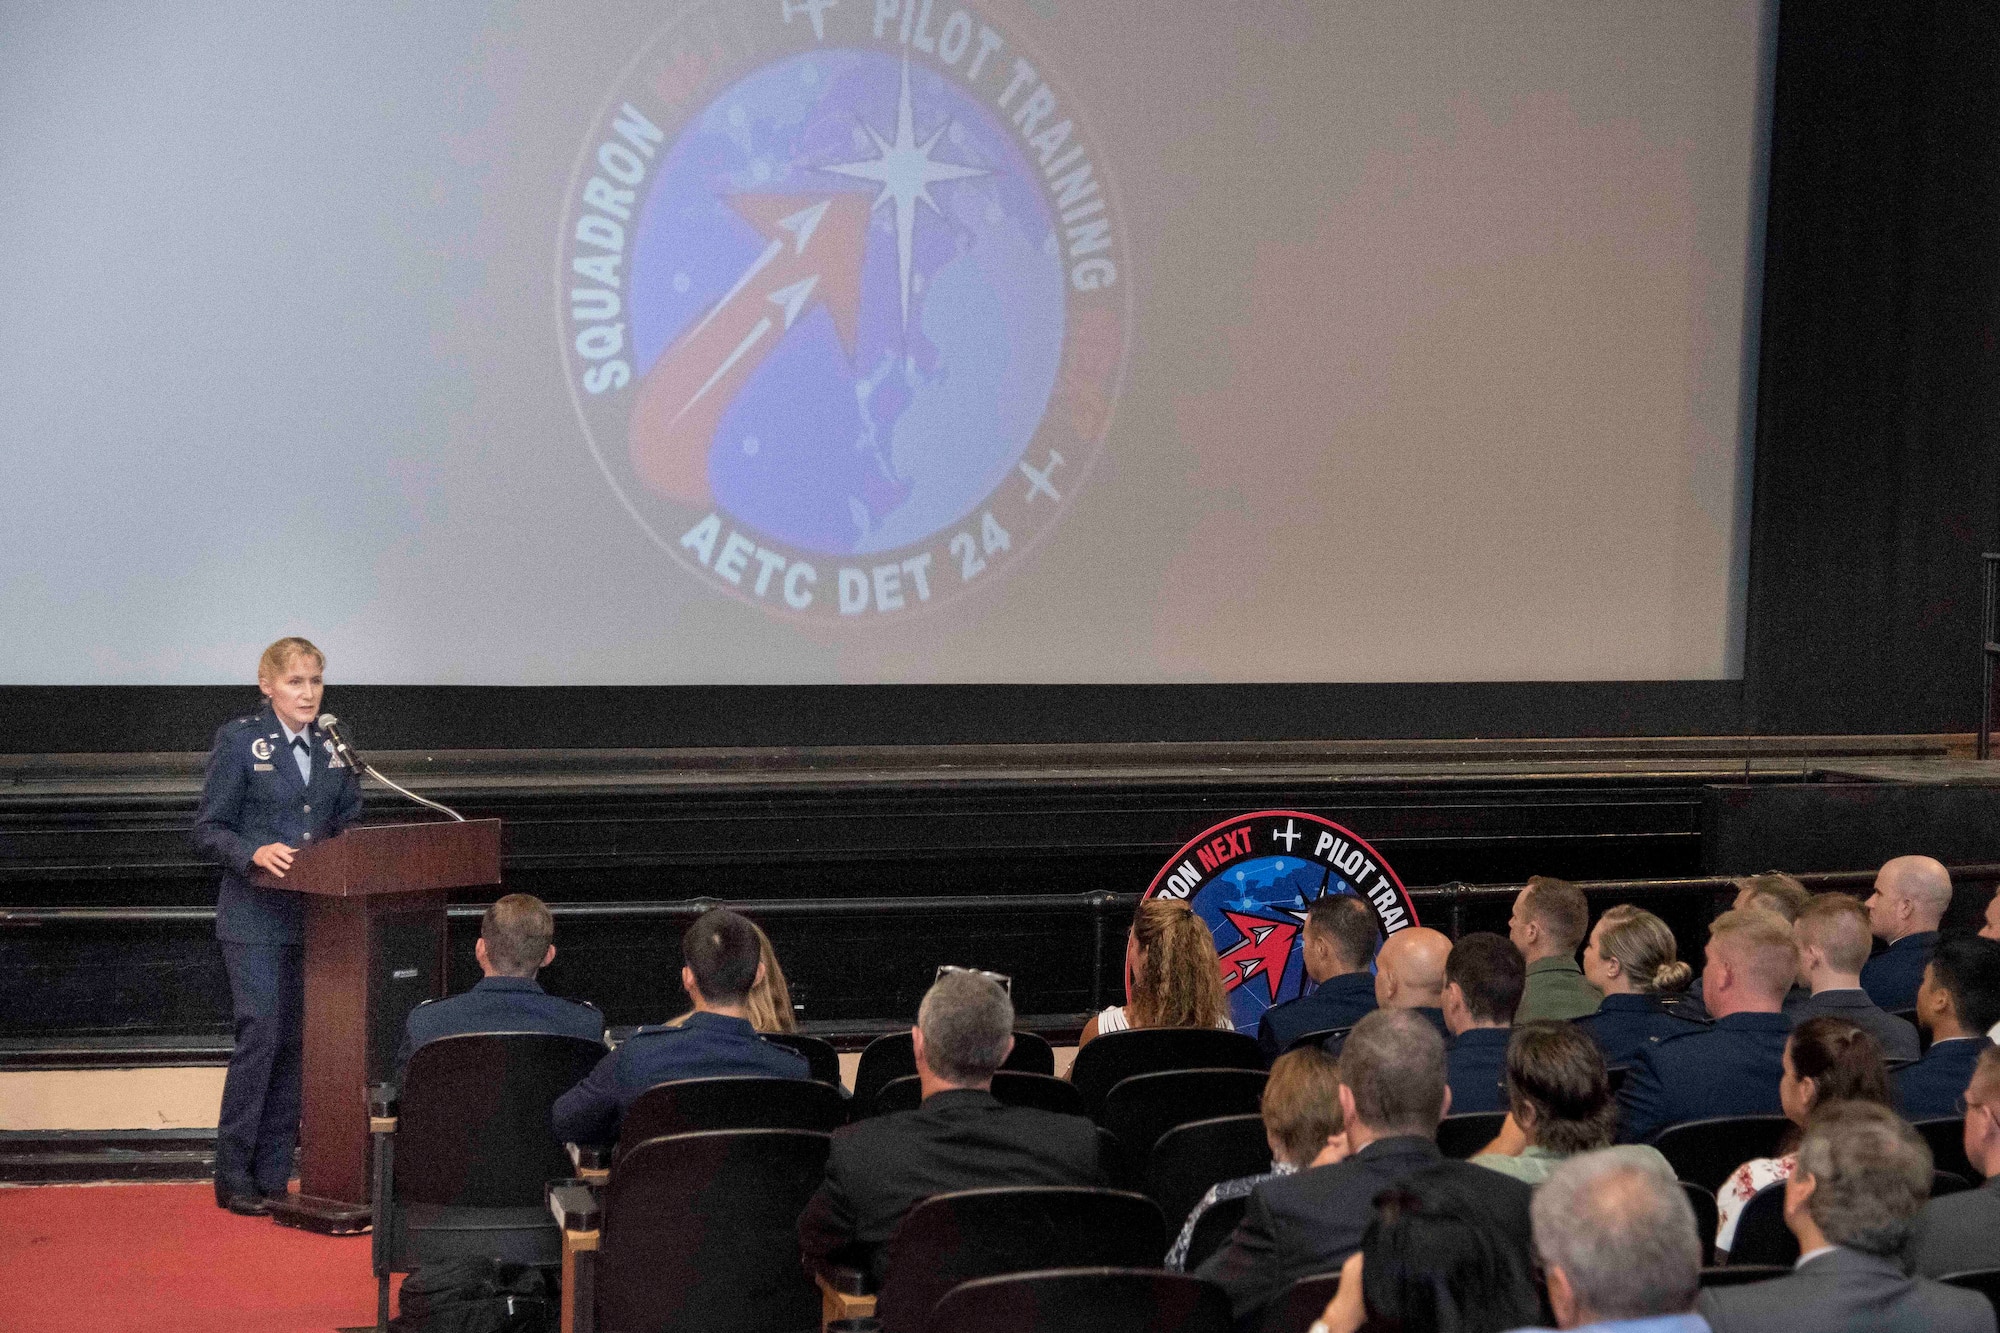 Brig. Gen. Jeannie Leavitt, Air Force Recruiting Service commander, speaks to the graduating class of the Pilot Training Next August 29, 2019, at Joint Base San Antonio-Randolph, Texas. PTN is a program to explore and potentially prototype a training environment that integrates various technologies to produce pilots in an accelerated, cost efficient, learning-focused manner. (U.S. Air Force photo by Sean M. Worrell)